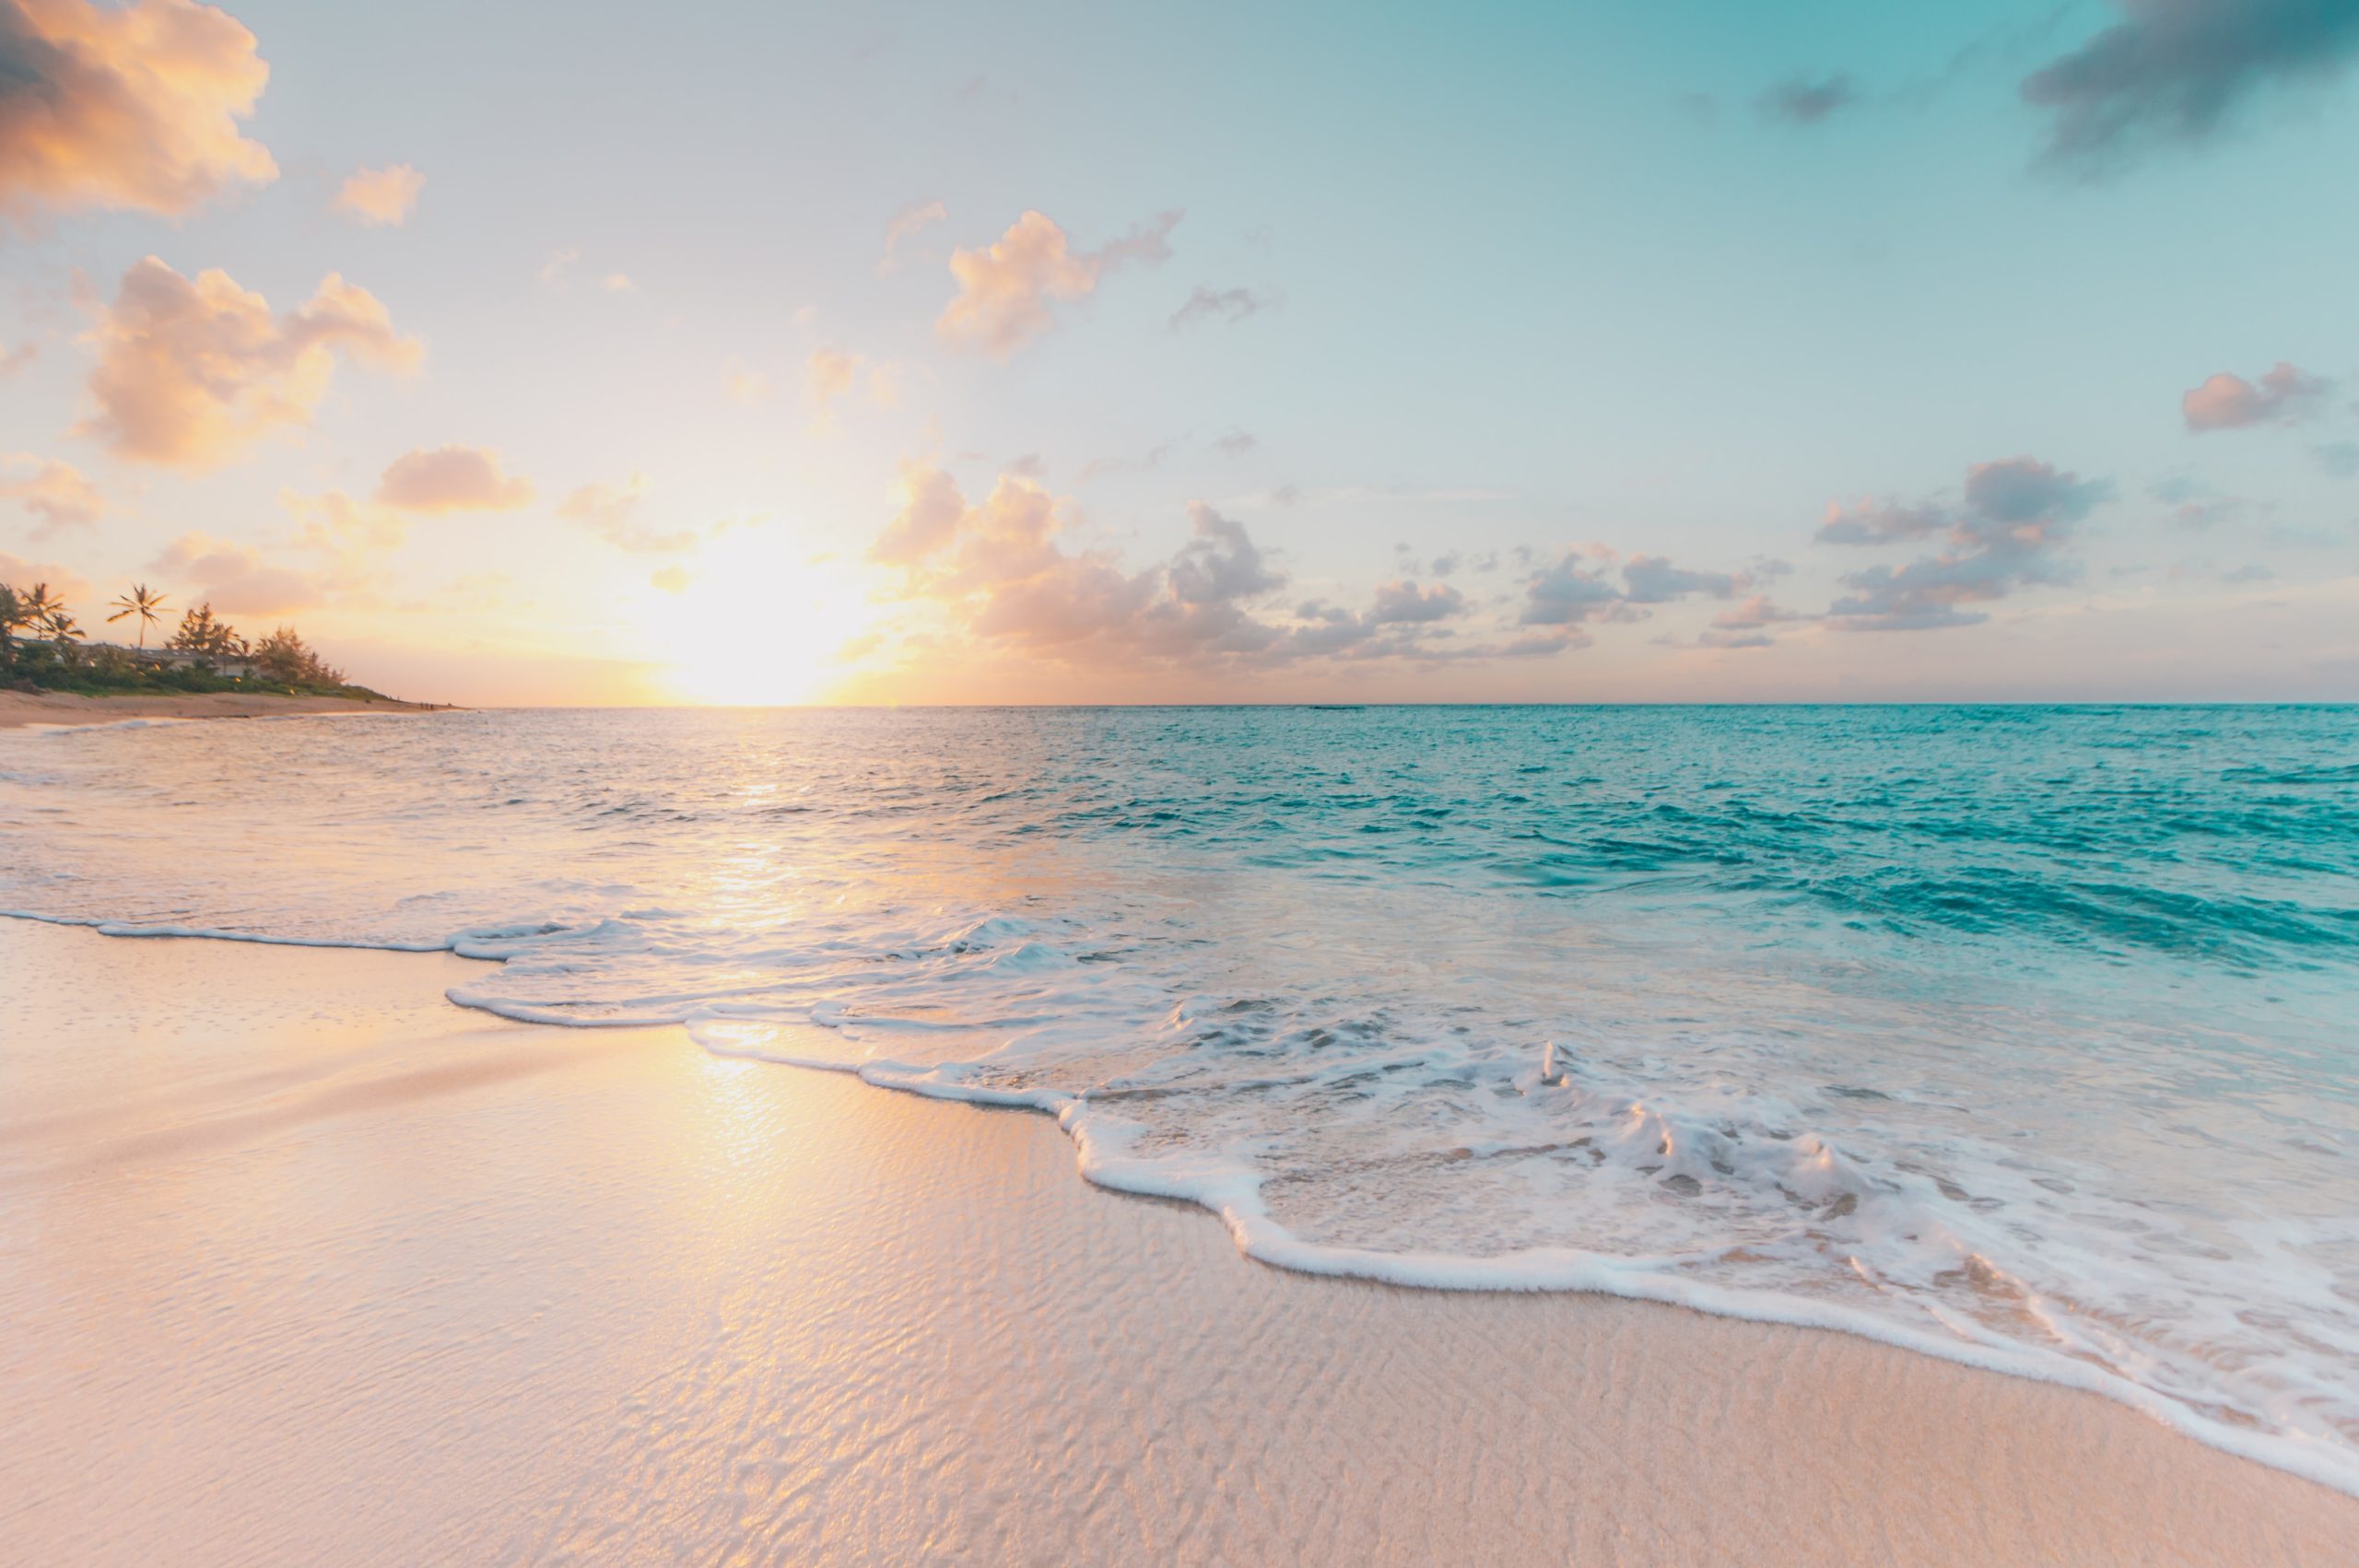 A beautiful sunset photo of a white and sandy beach, depicting the idea of "change."